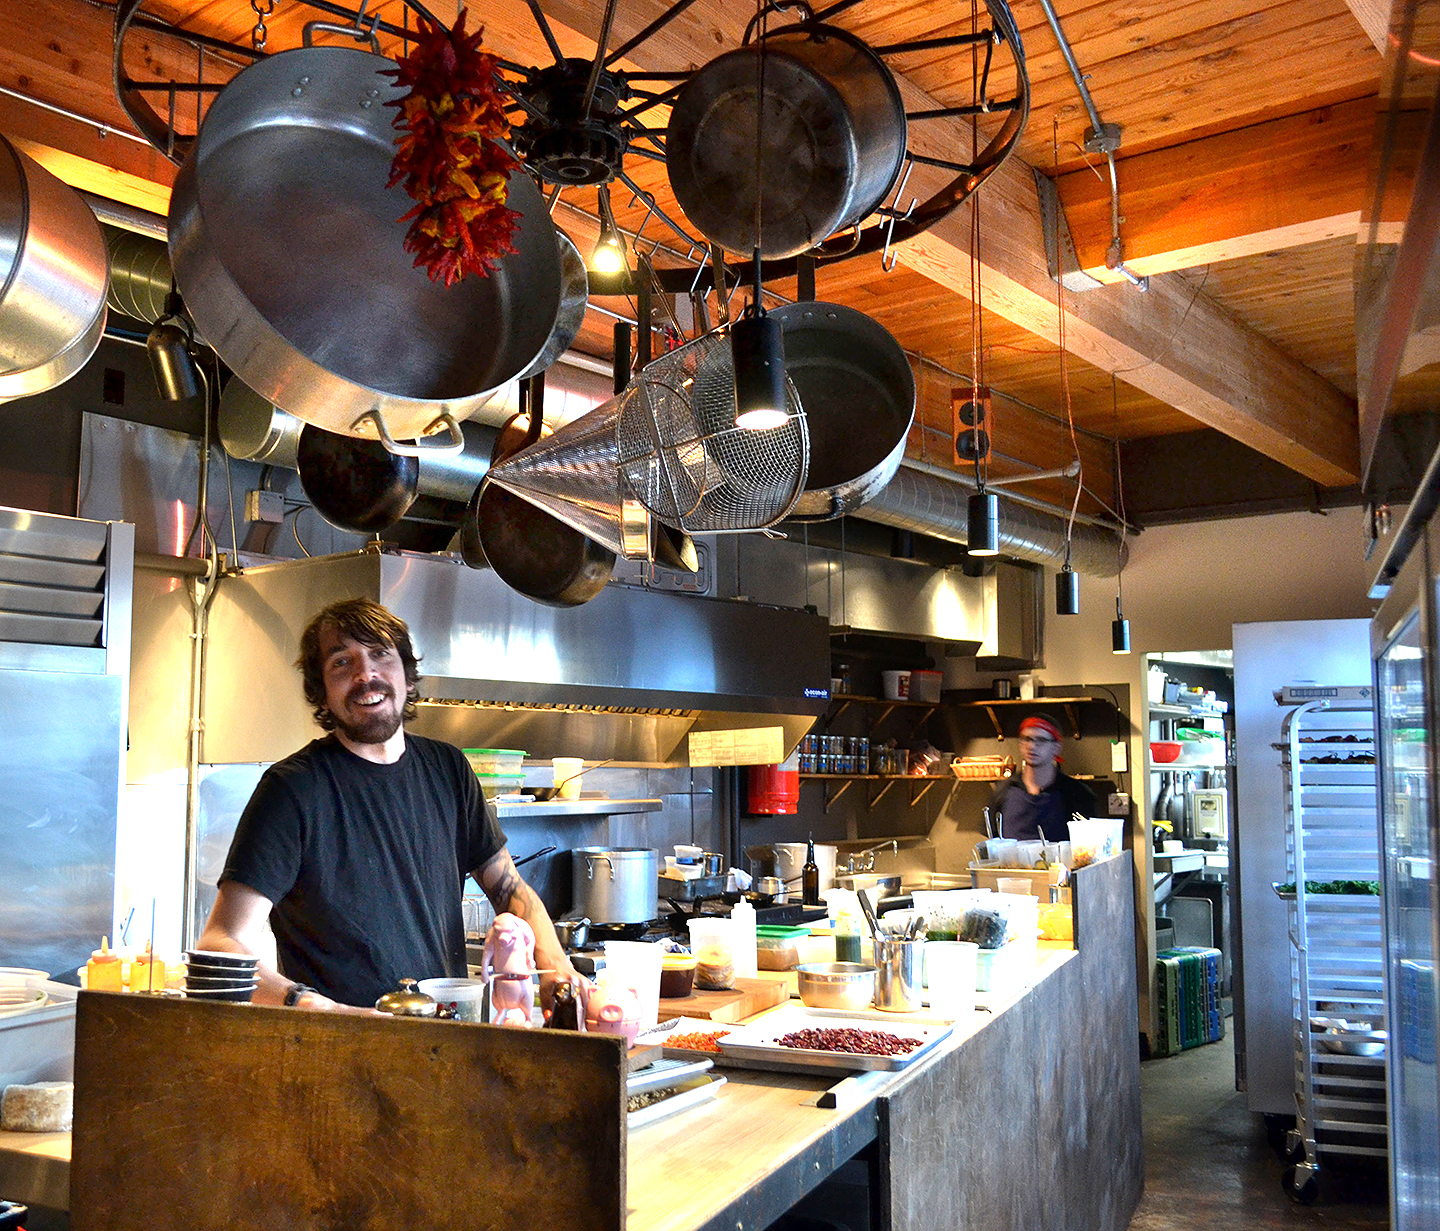 Ronspies in his cozy kitchen at Le Petit Cochon.